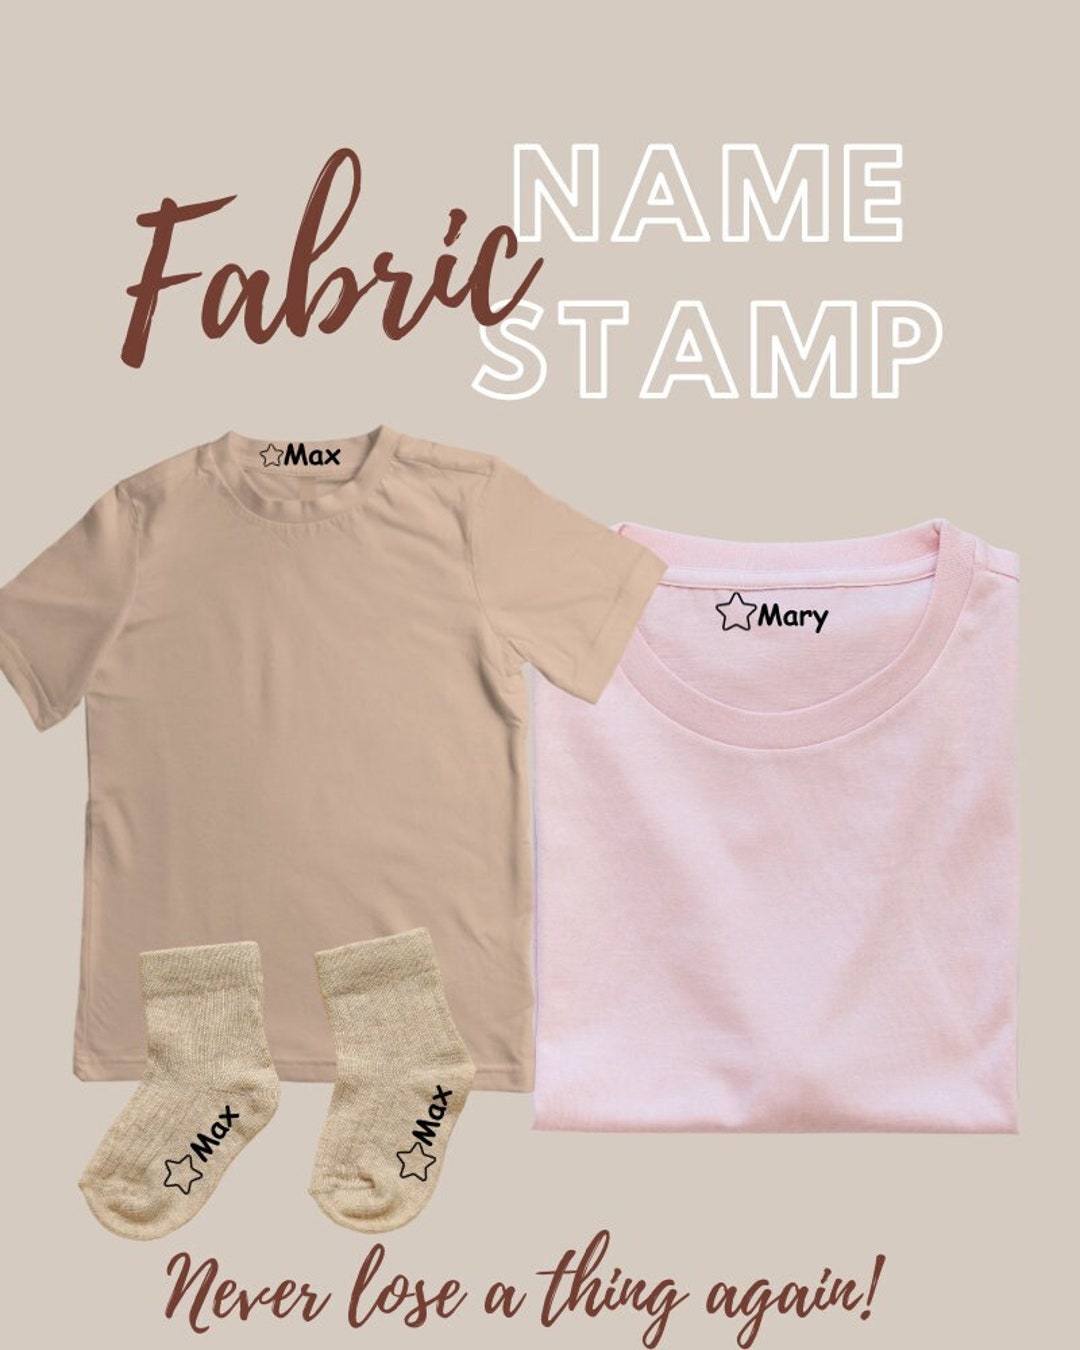 Anyone bought Name Stamp? : r/toddlers